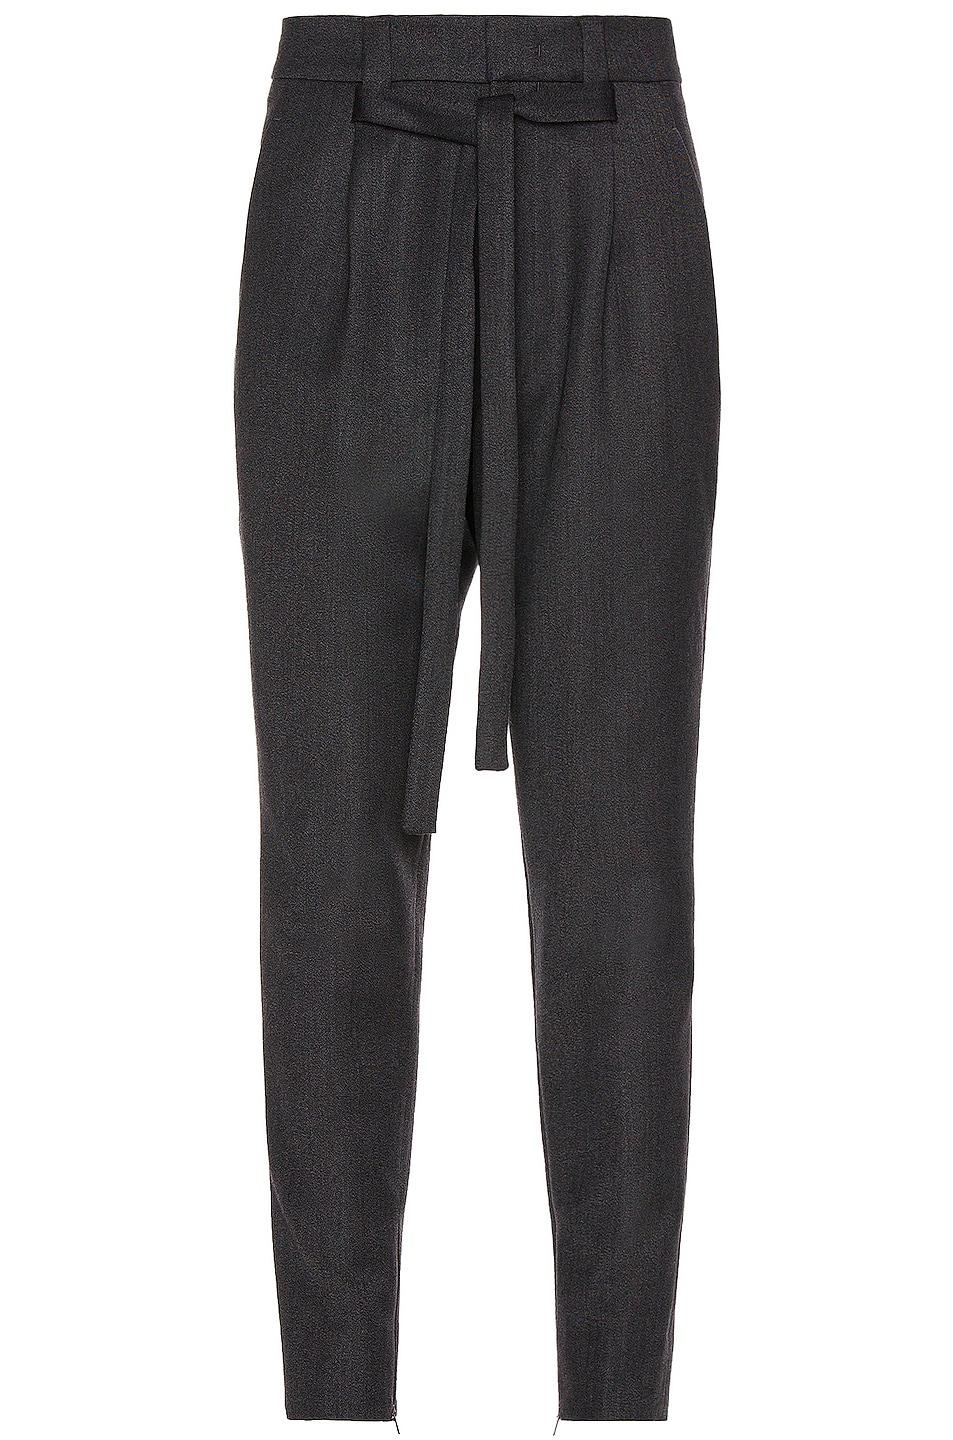 Image 1 of Fear of God Slim Trouser in Charcoal